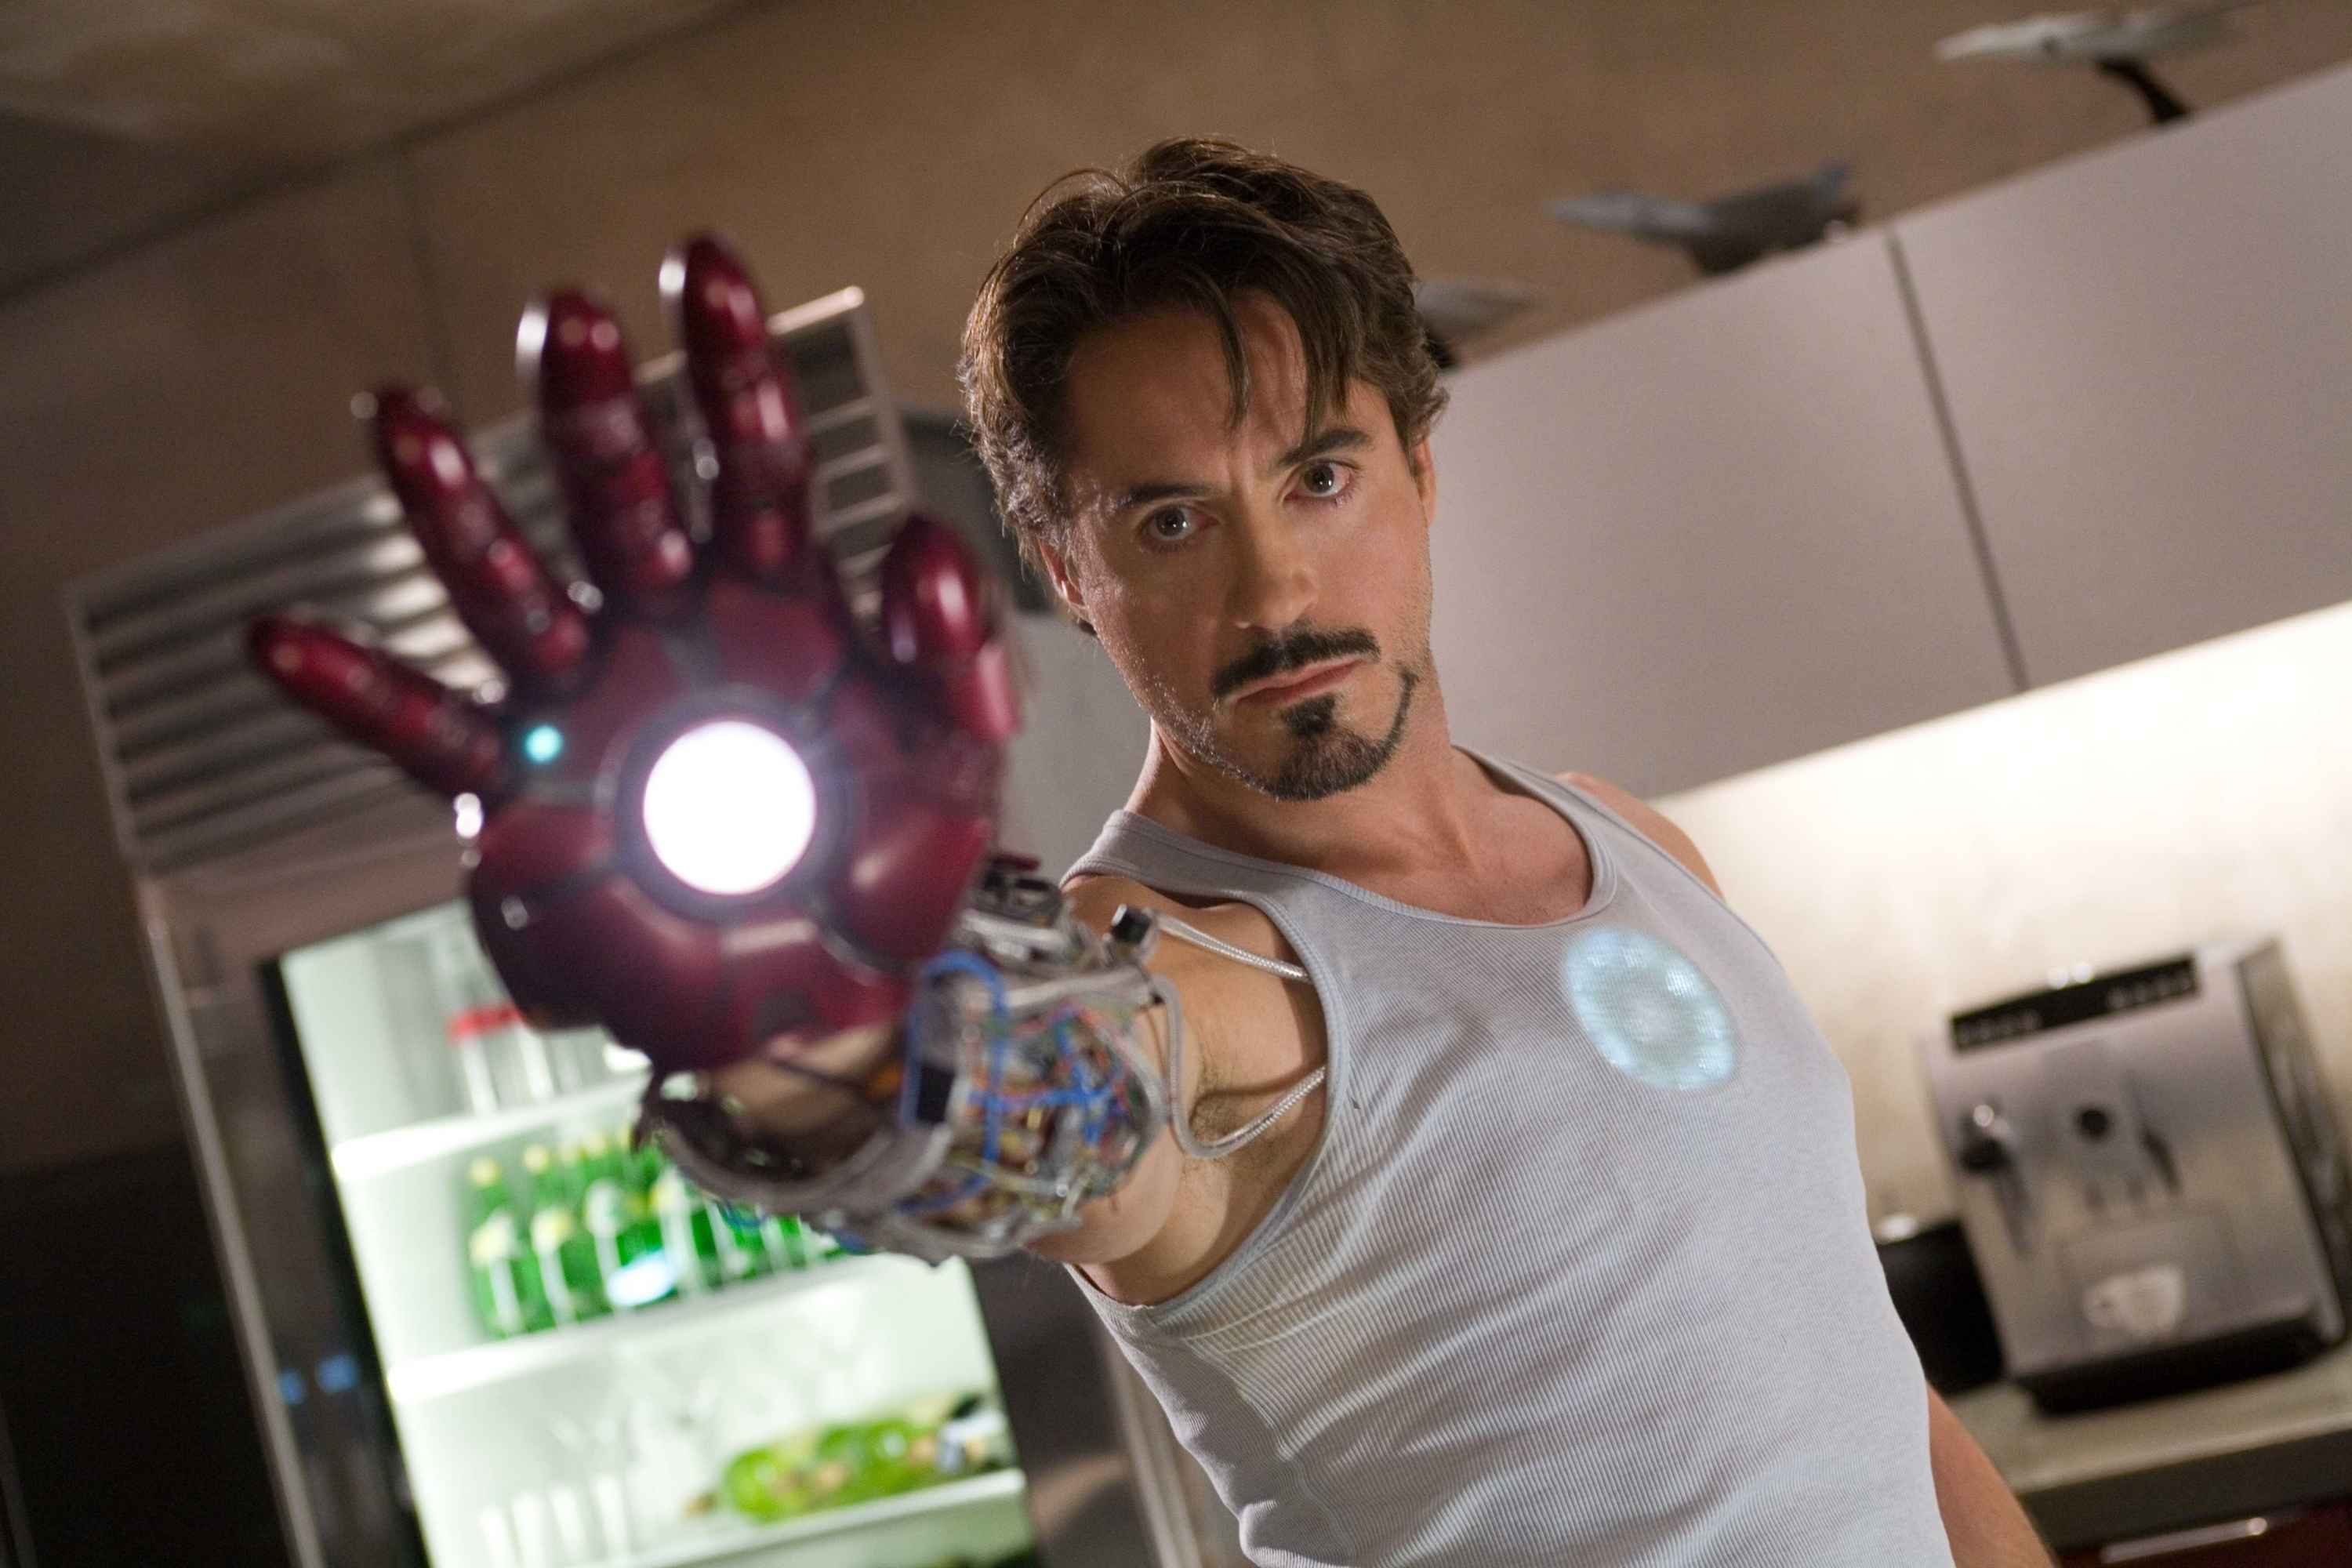 tony stark shows us what a superhero is all about!